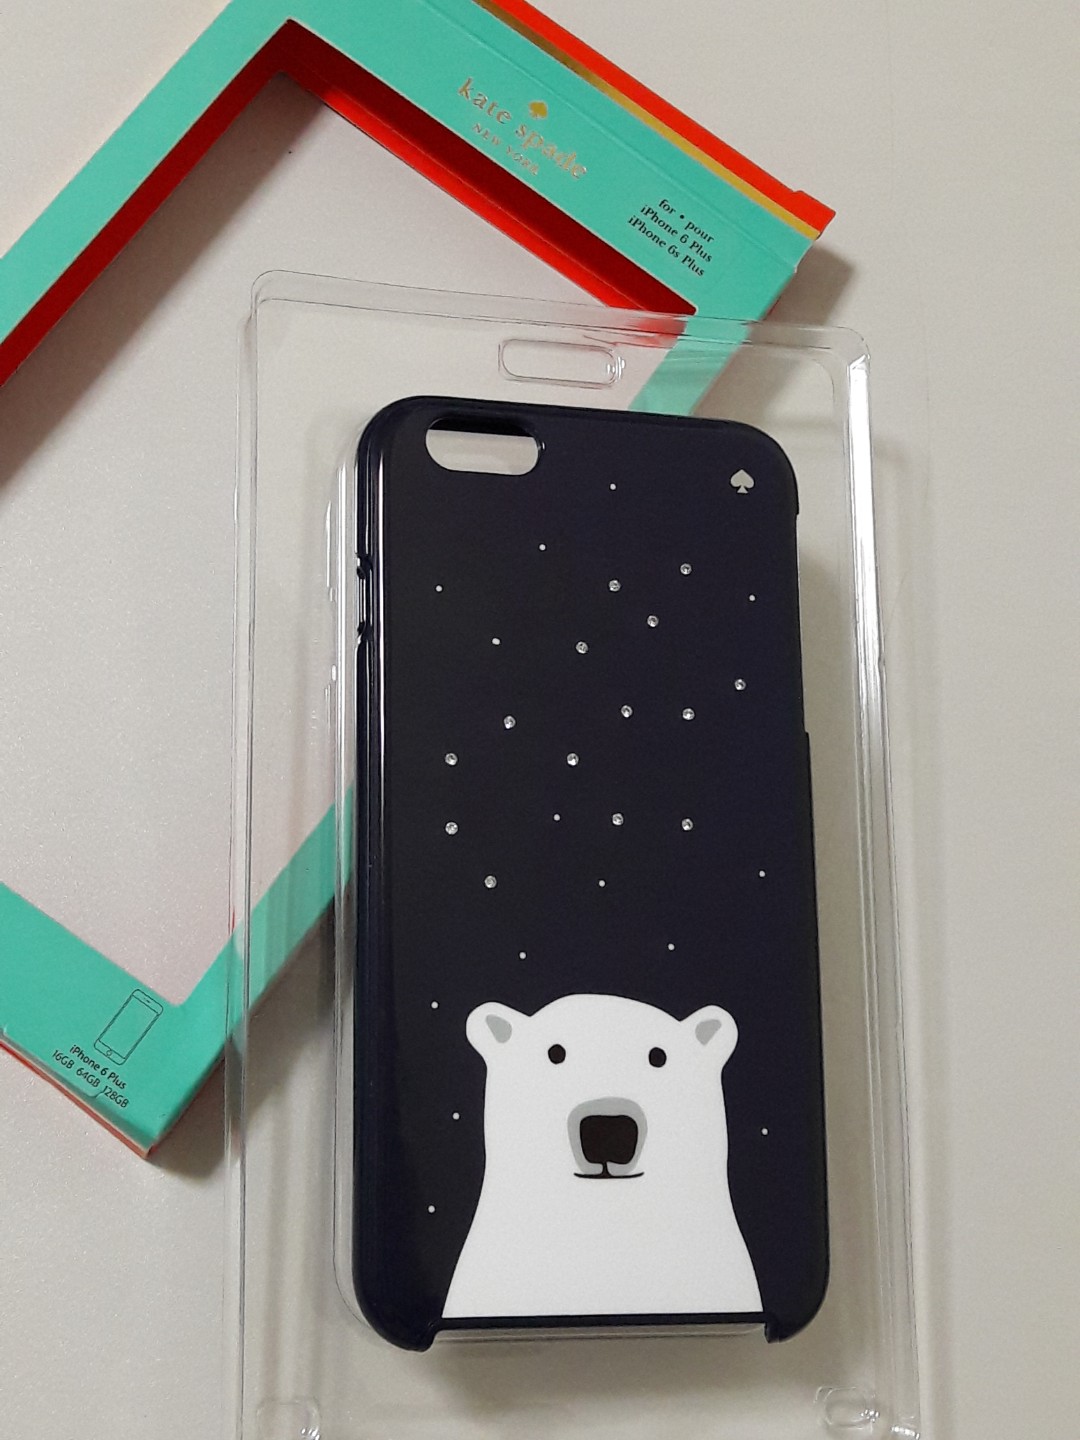 nego fast deal] Kate Spade iPhone 6 Plus Case Cover - Polar Bear Gems,  Mobile Phones & Gadgets, Mobile & Gadget Accessories, Cases & Sleeves on  Carousell